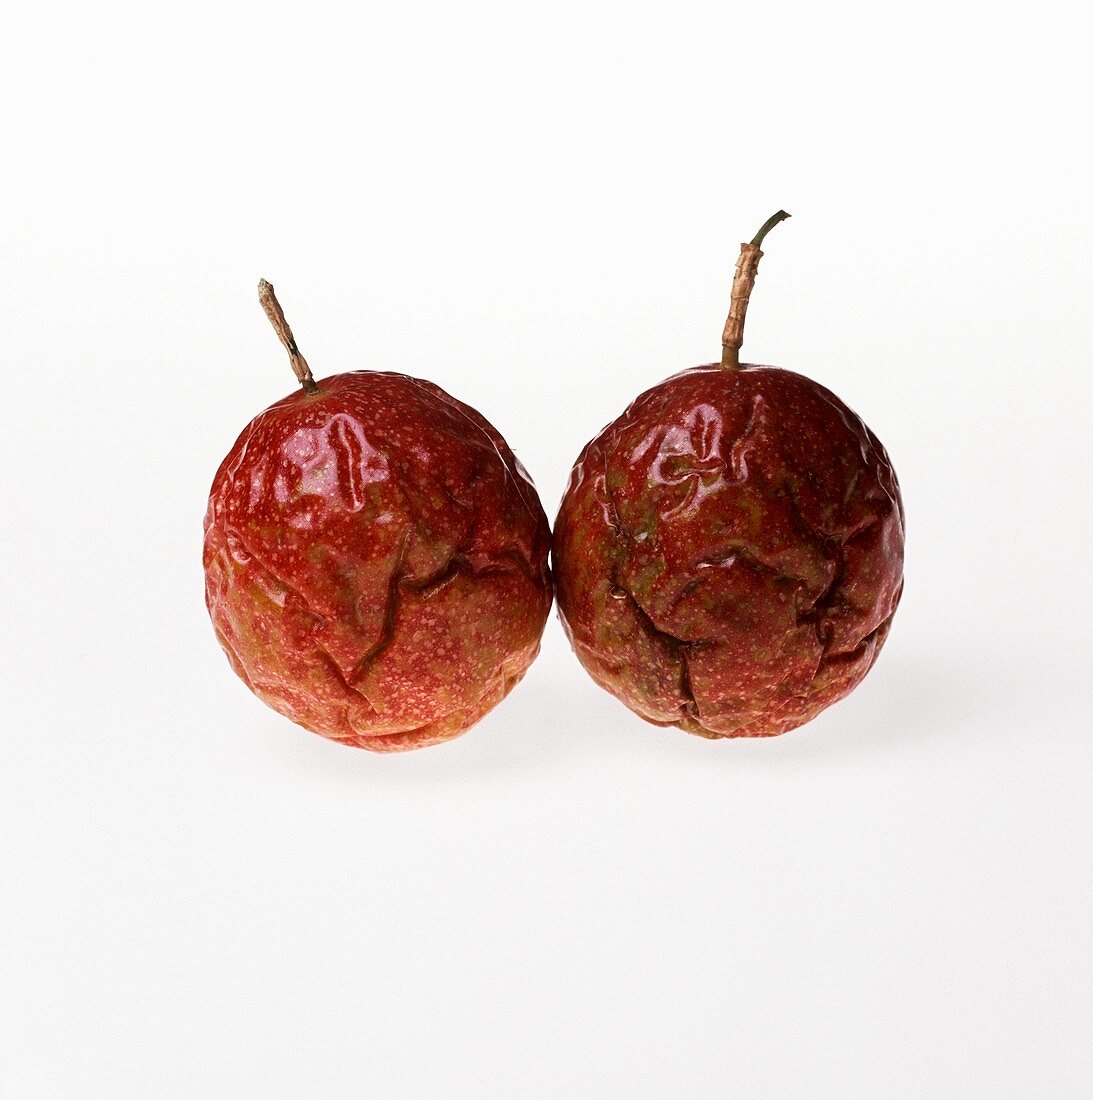 Two Passion Fruit on White Background